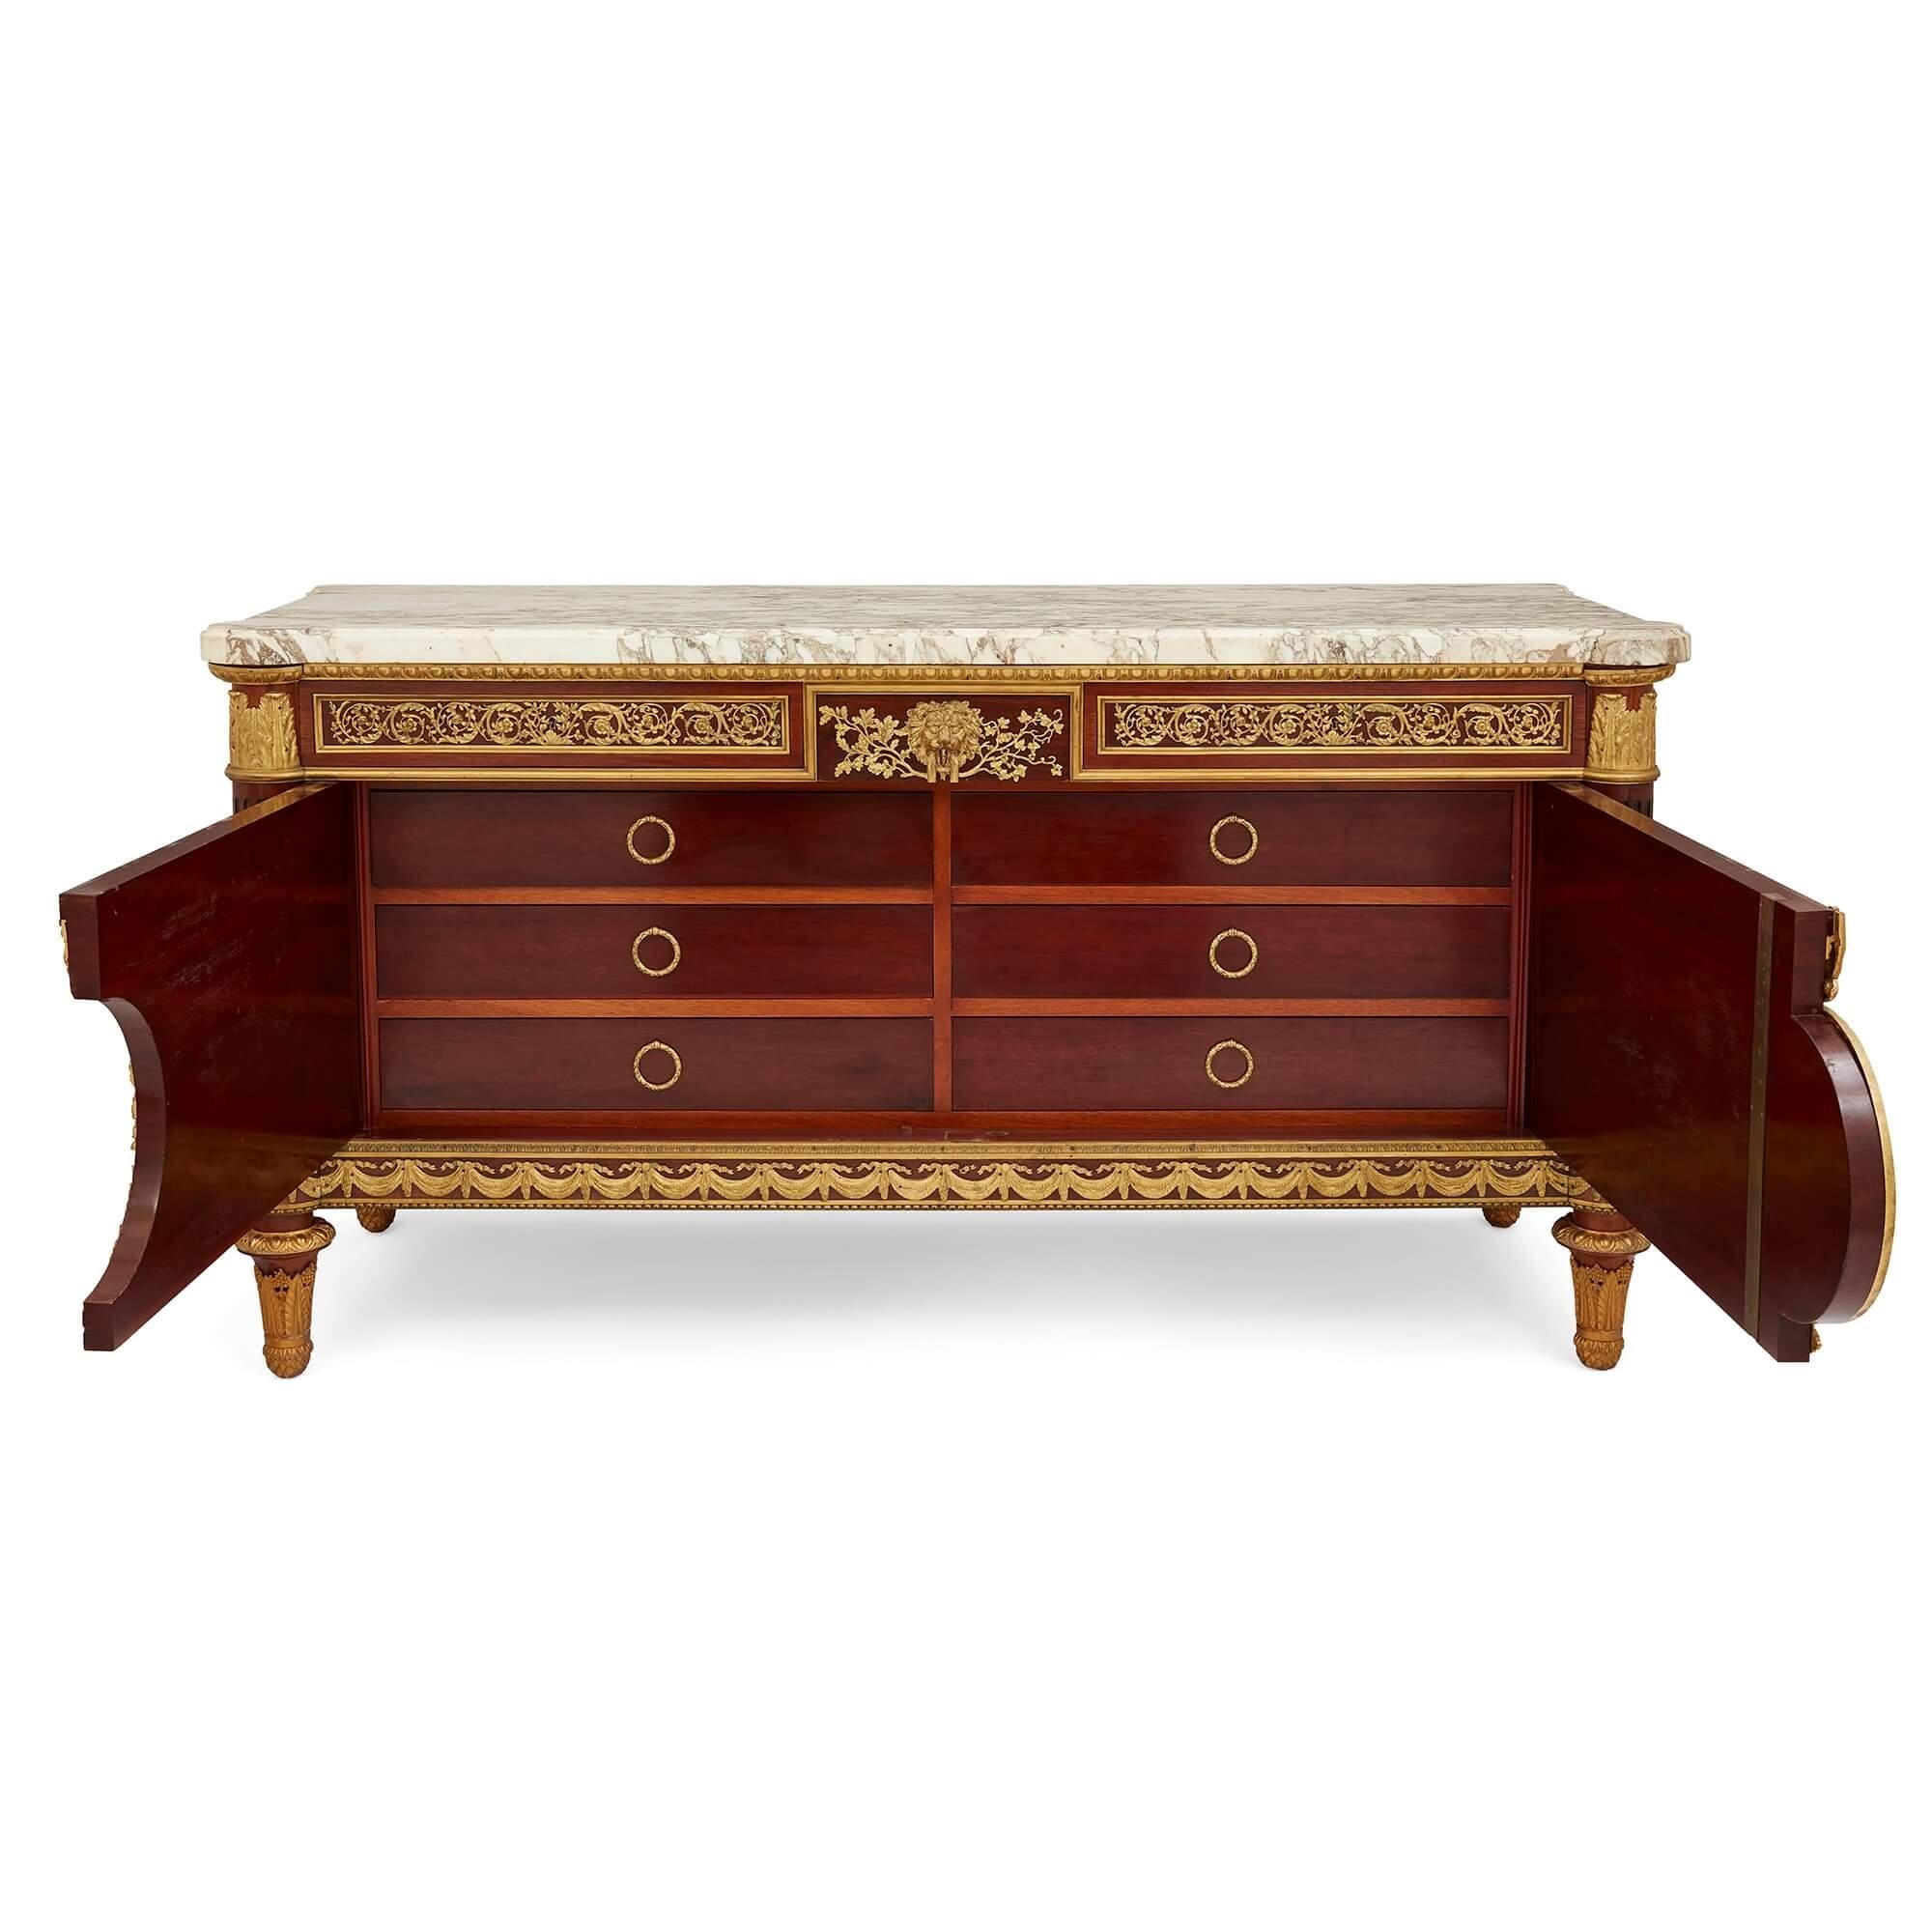 Antique French Louis XVI Style Ormolu-Mounted Commode after Benneman In Good Condition For Sale In London, GB